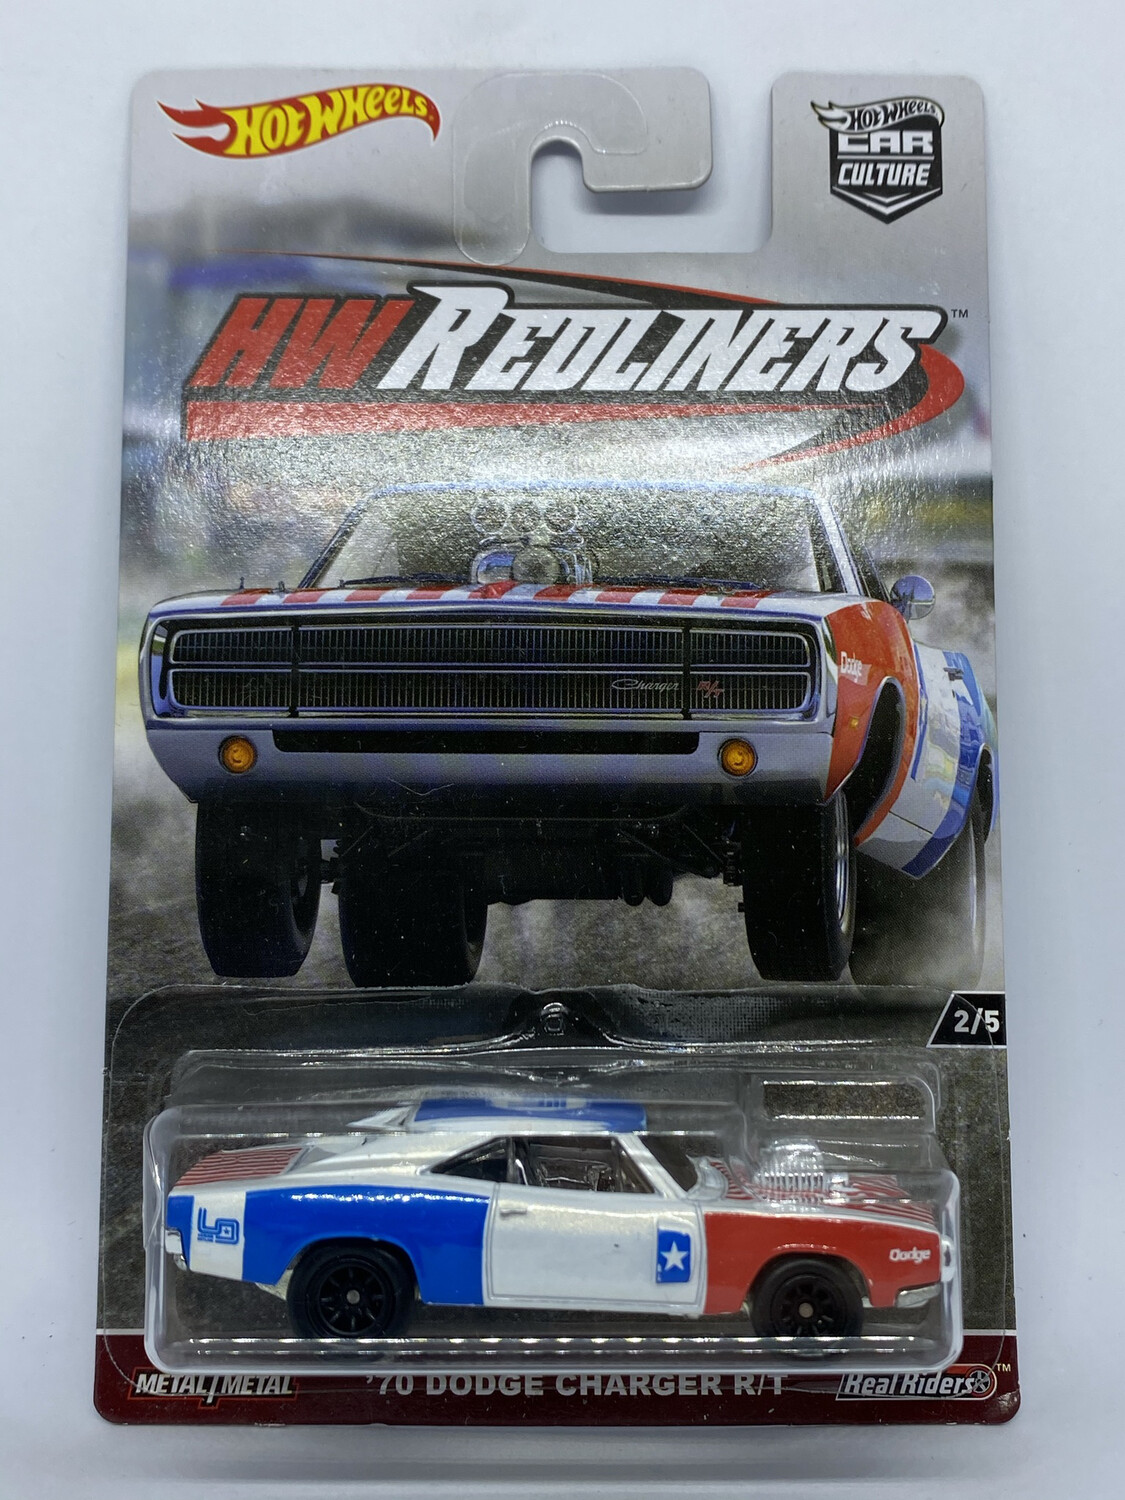 F2 '70 Dodge Charger R/T DWH83 HW Redliners 2017 Hot Wheels Car Culture